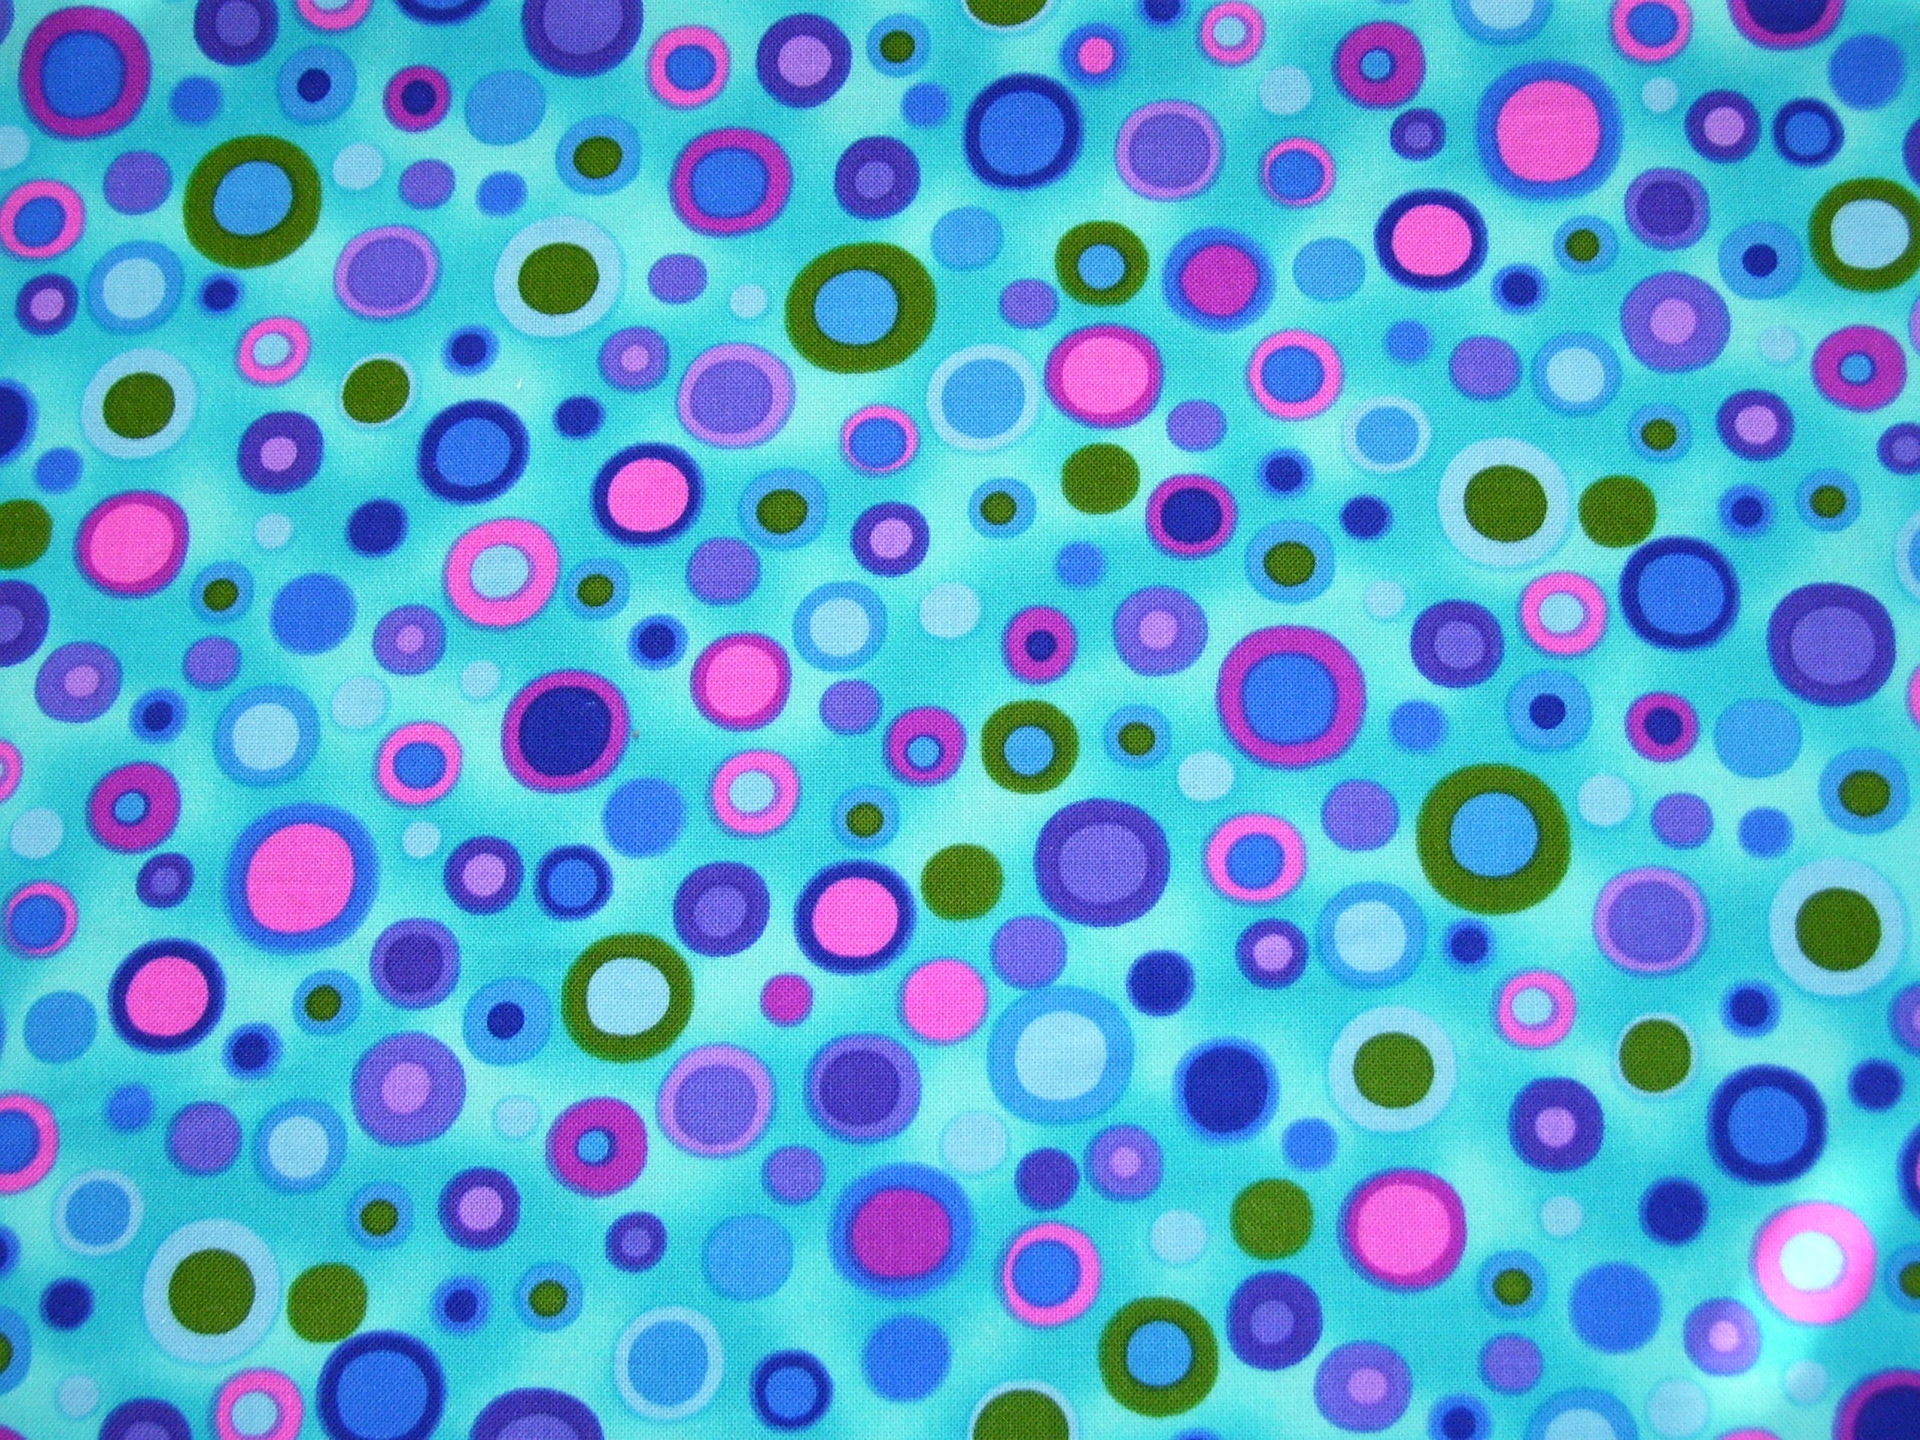 Designs images polka dots HD wallpaper and background photos